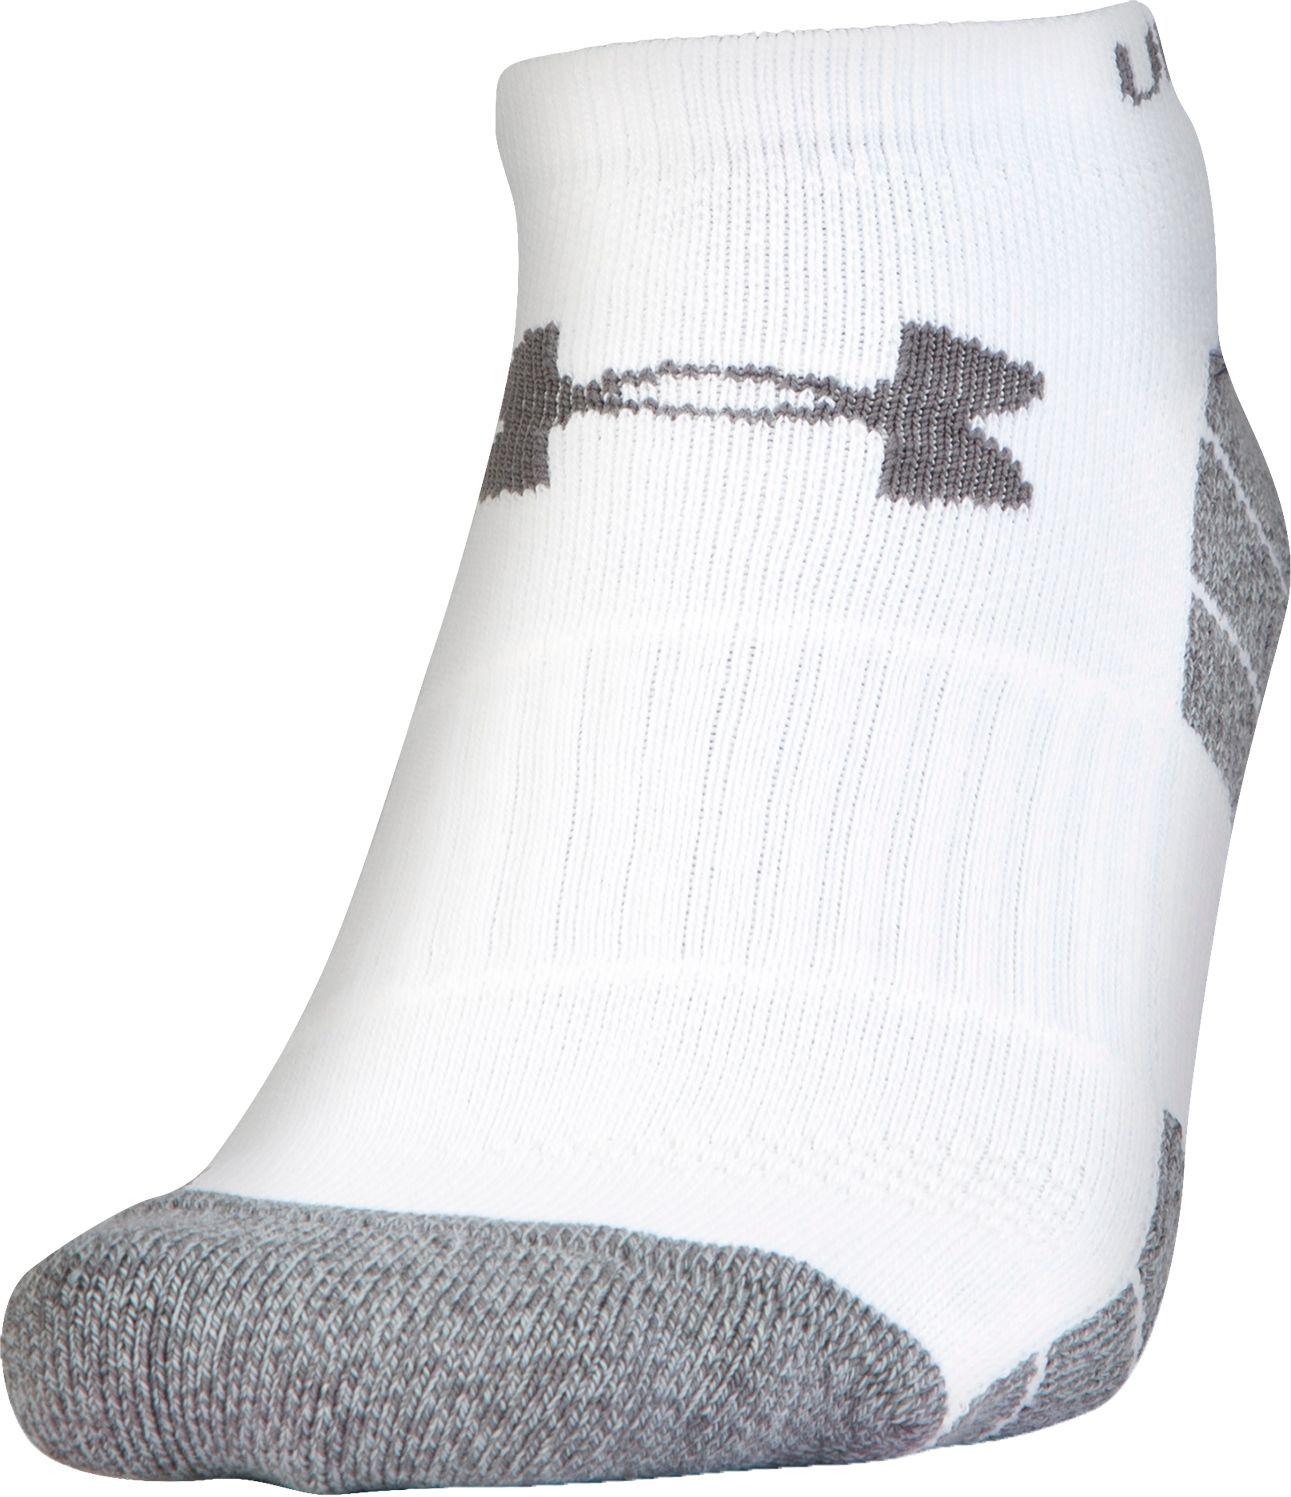 under armour elevated performance no show socks